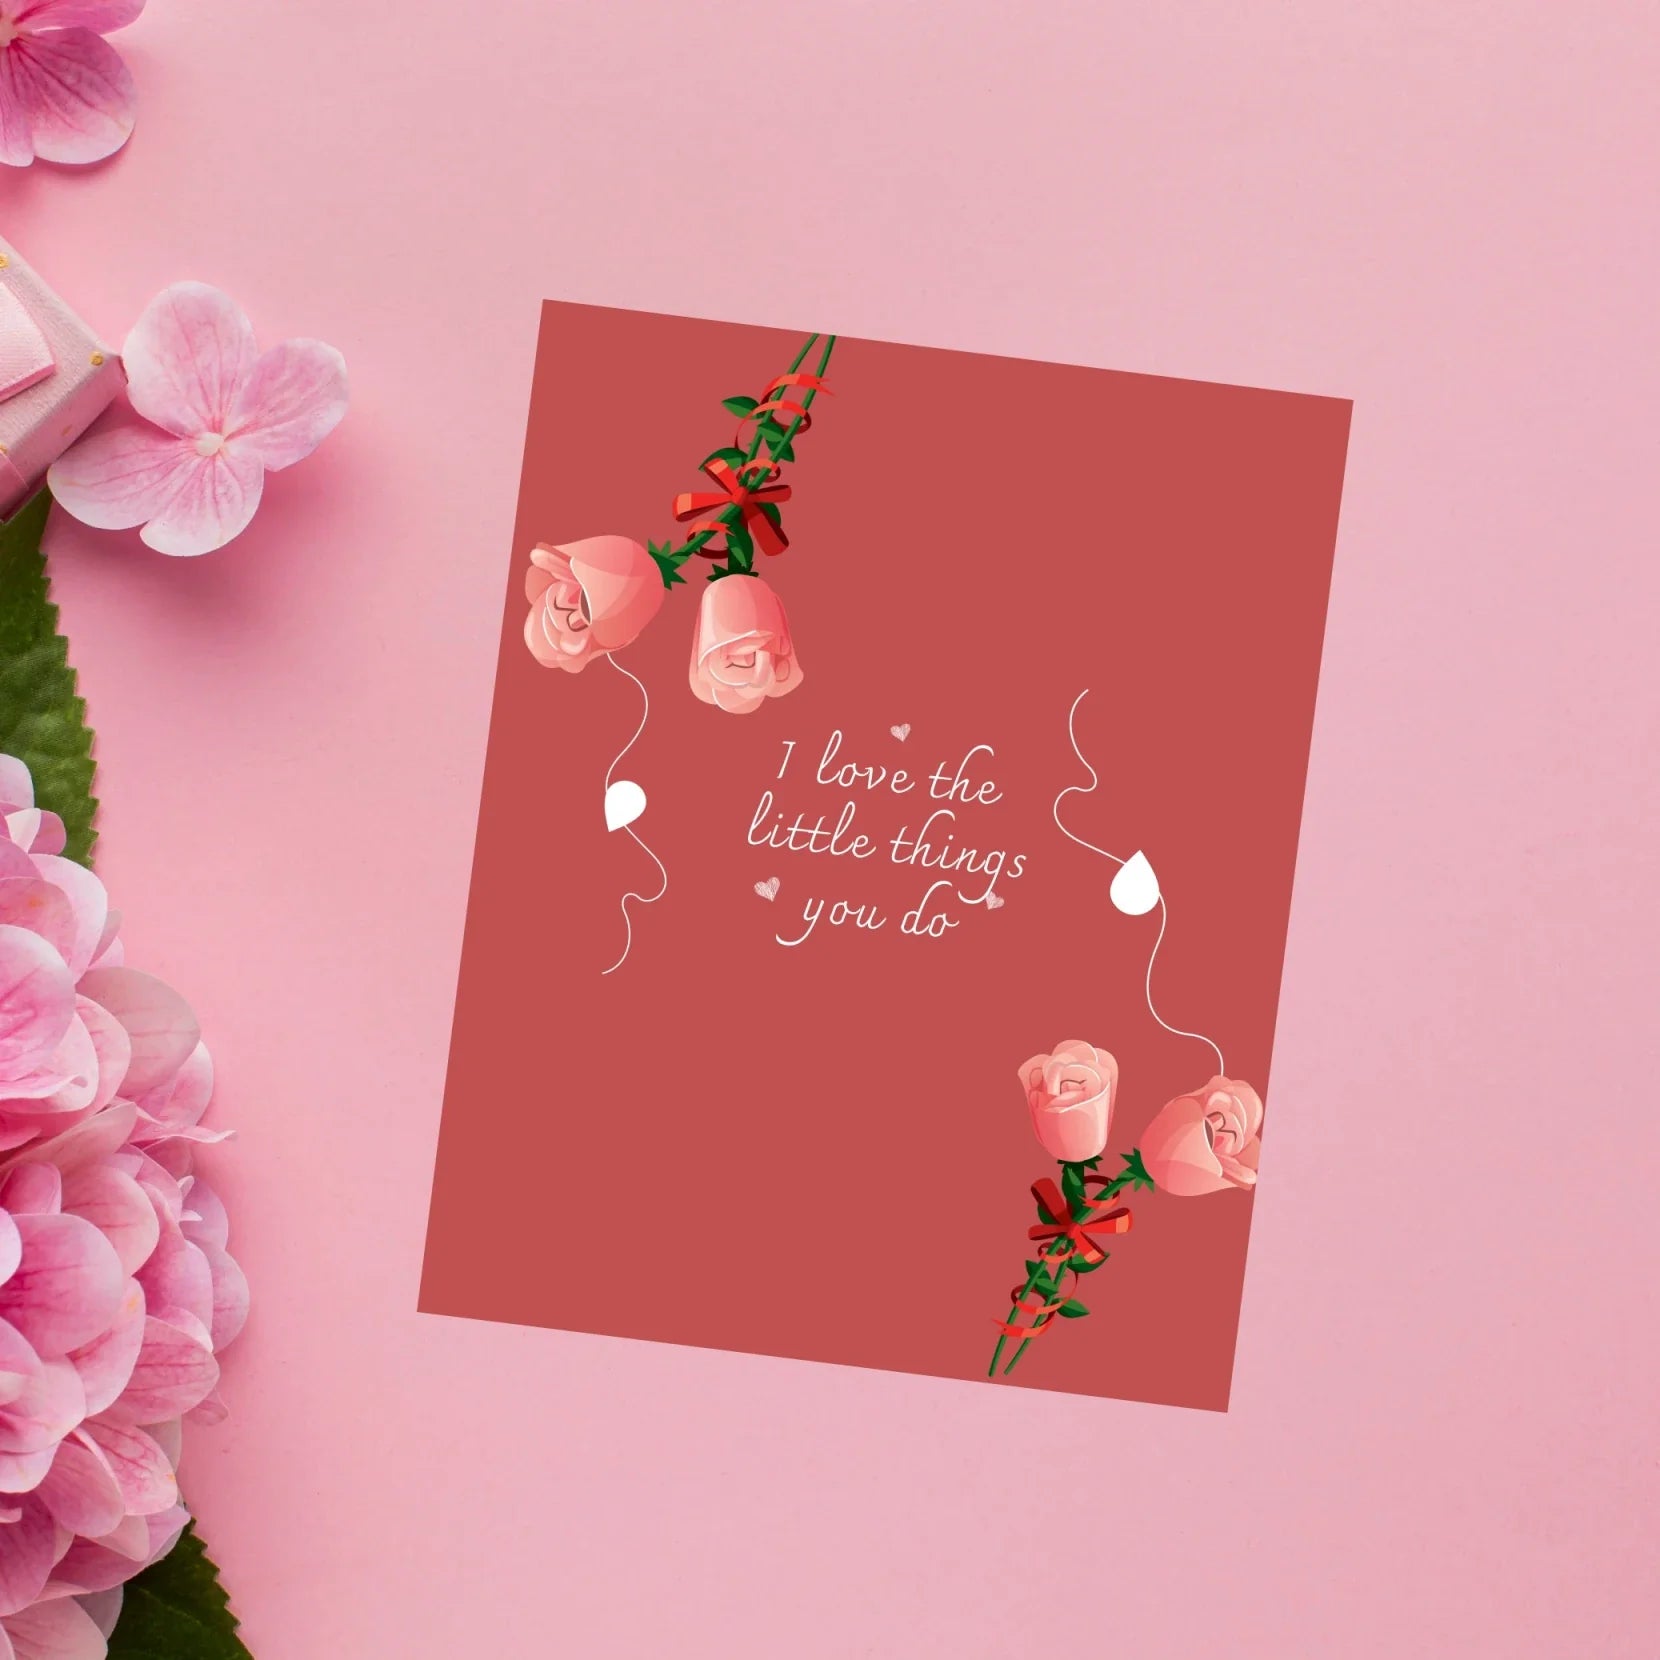 "Pen down your thoughts and feelings for your fiance and hope for the best with our unique lettercard.  "